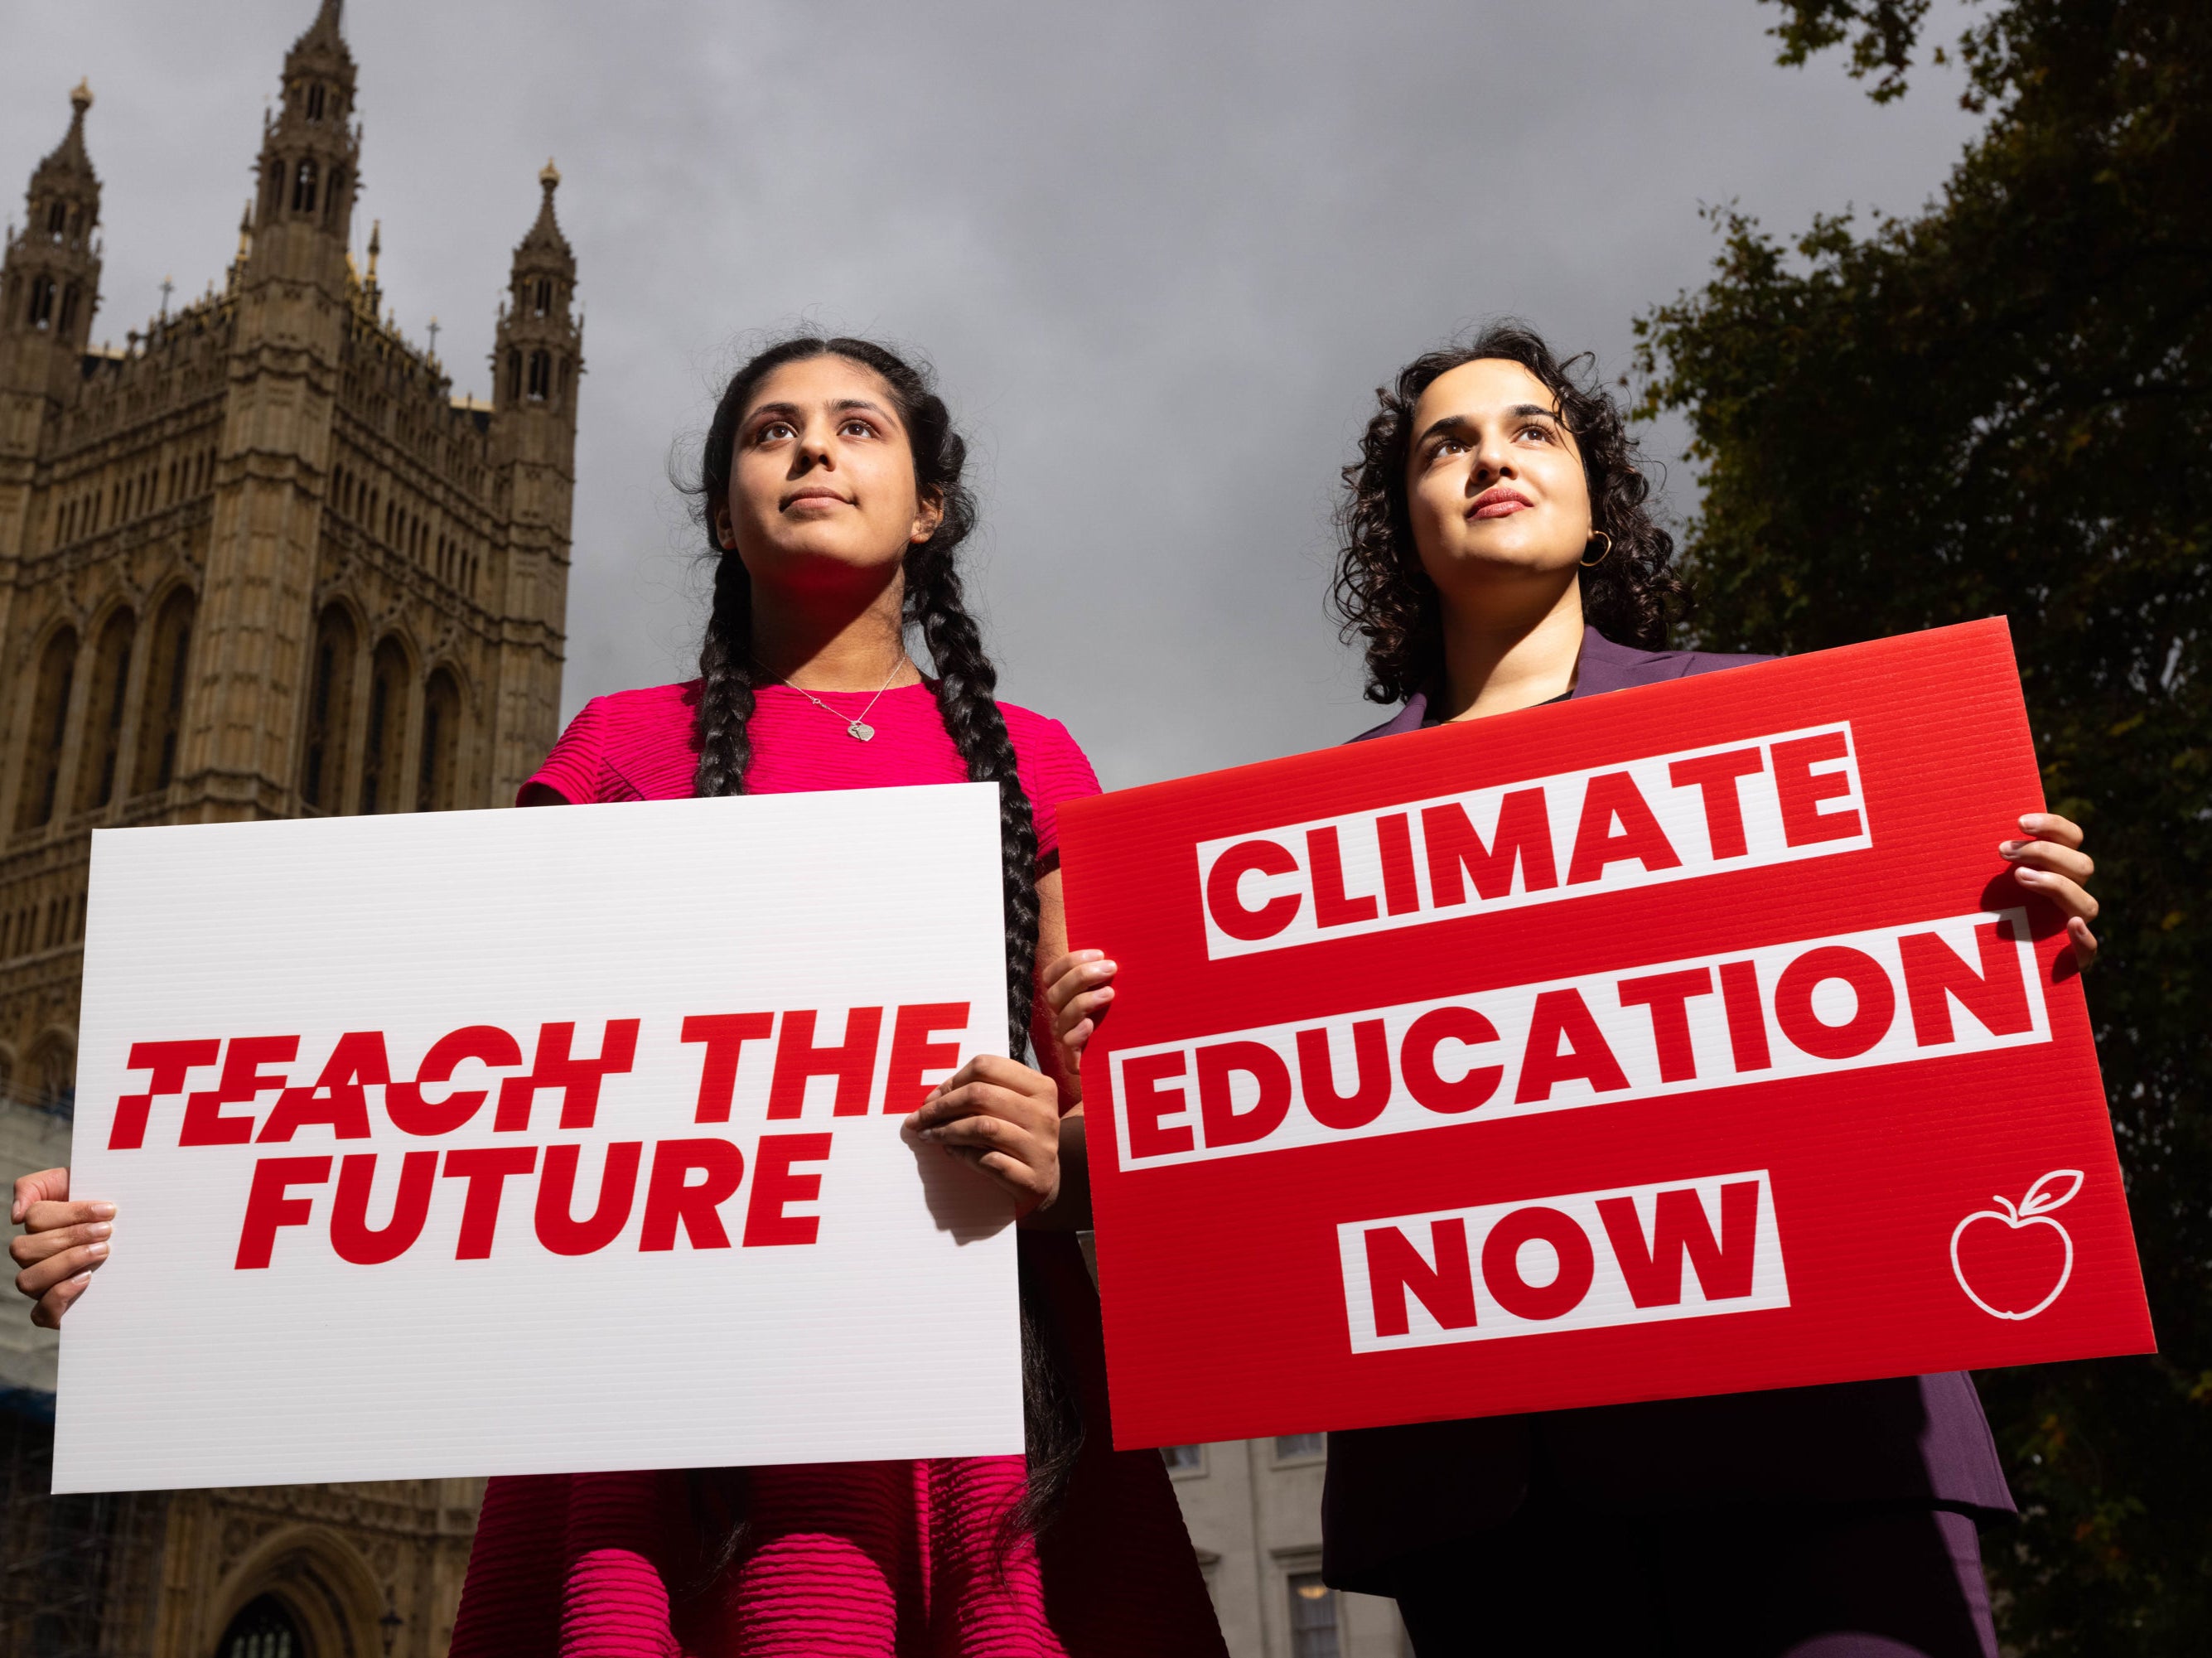 Scarlett Westbrook from Teach the Future and MP Nadia Whittome are calling for more climate education in schools